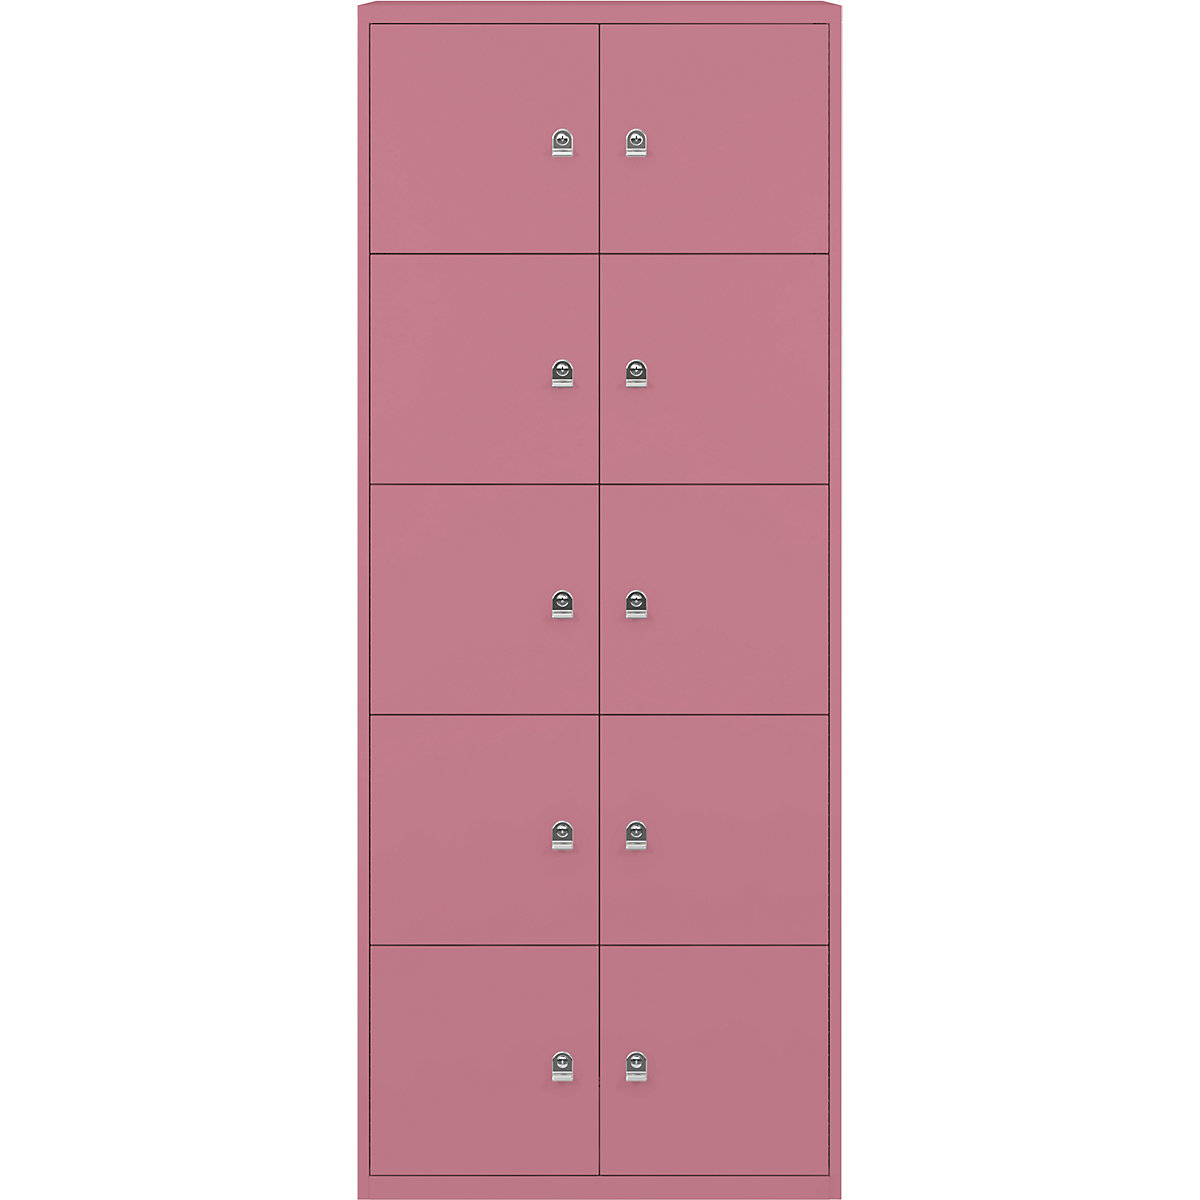 LateralFile™ lodge – BISLEY, with 10 lockable compartments, height 375 mm each, pink